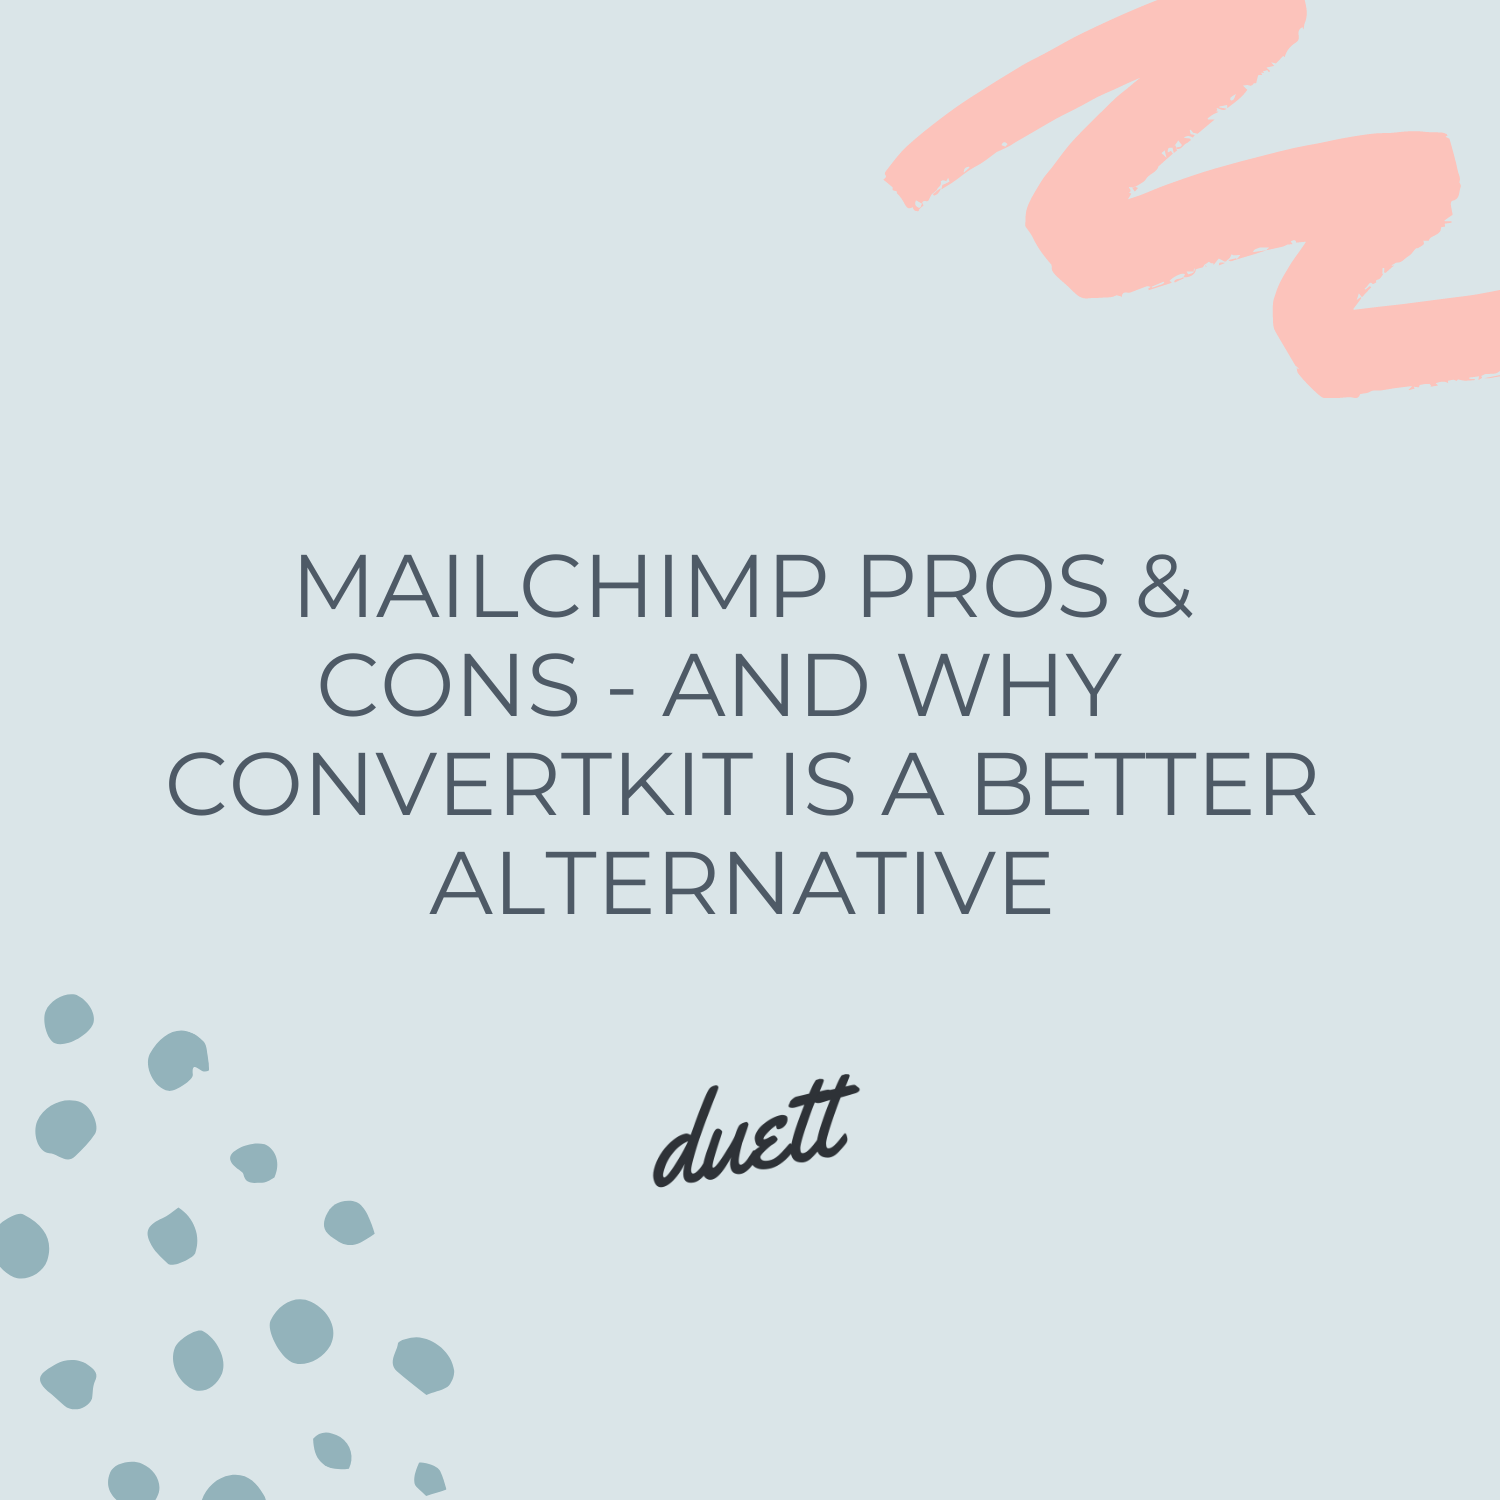 Mailchimp Pros and Cons - and why ConvertKit is a better alternative